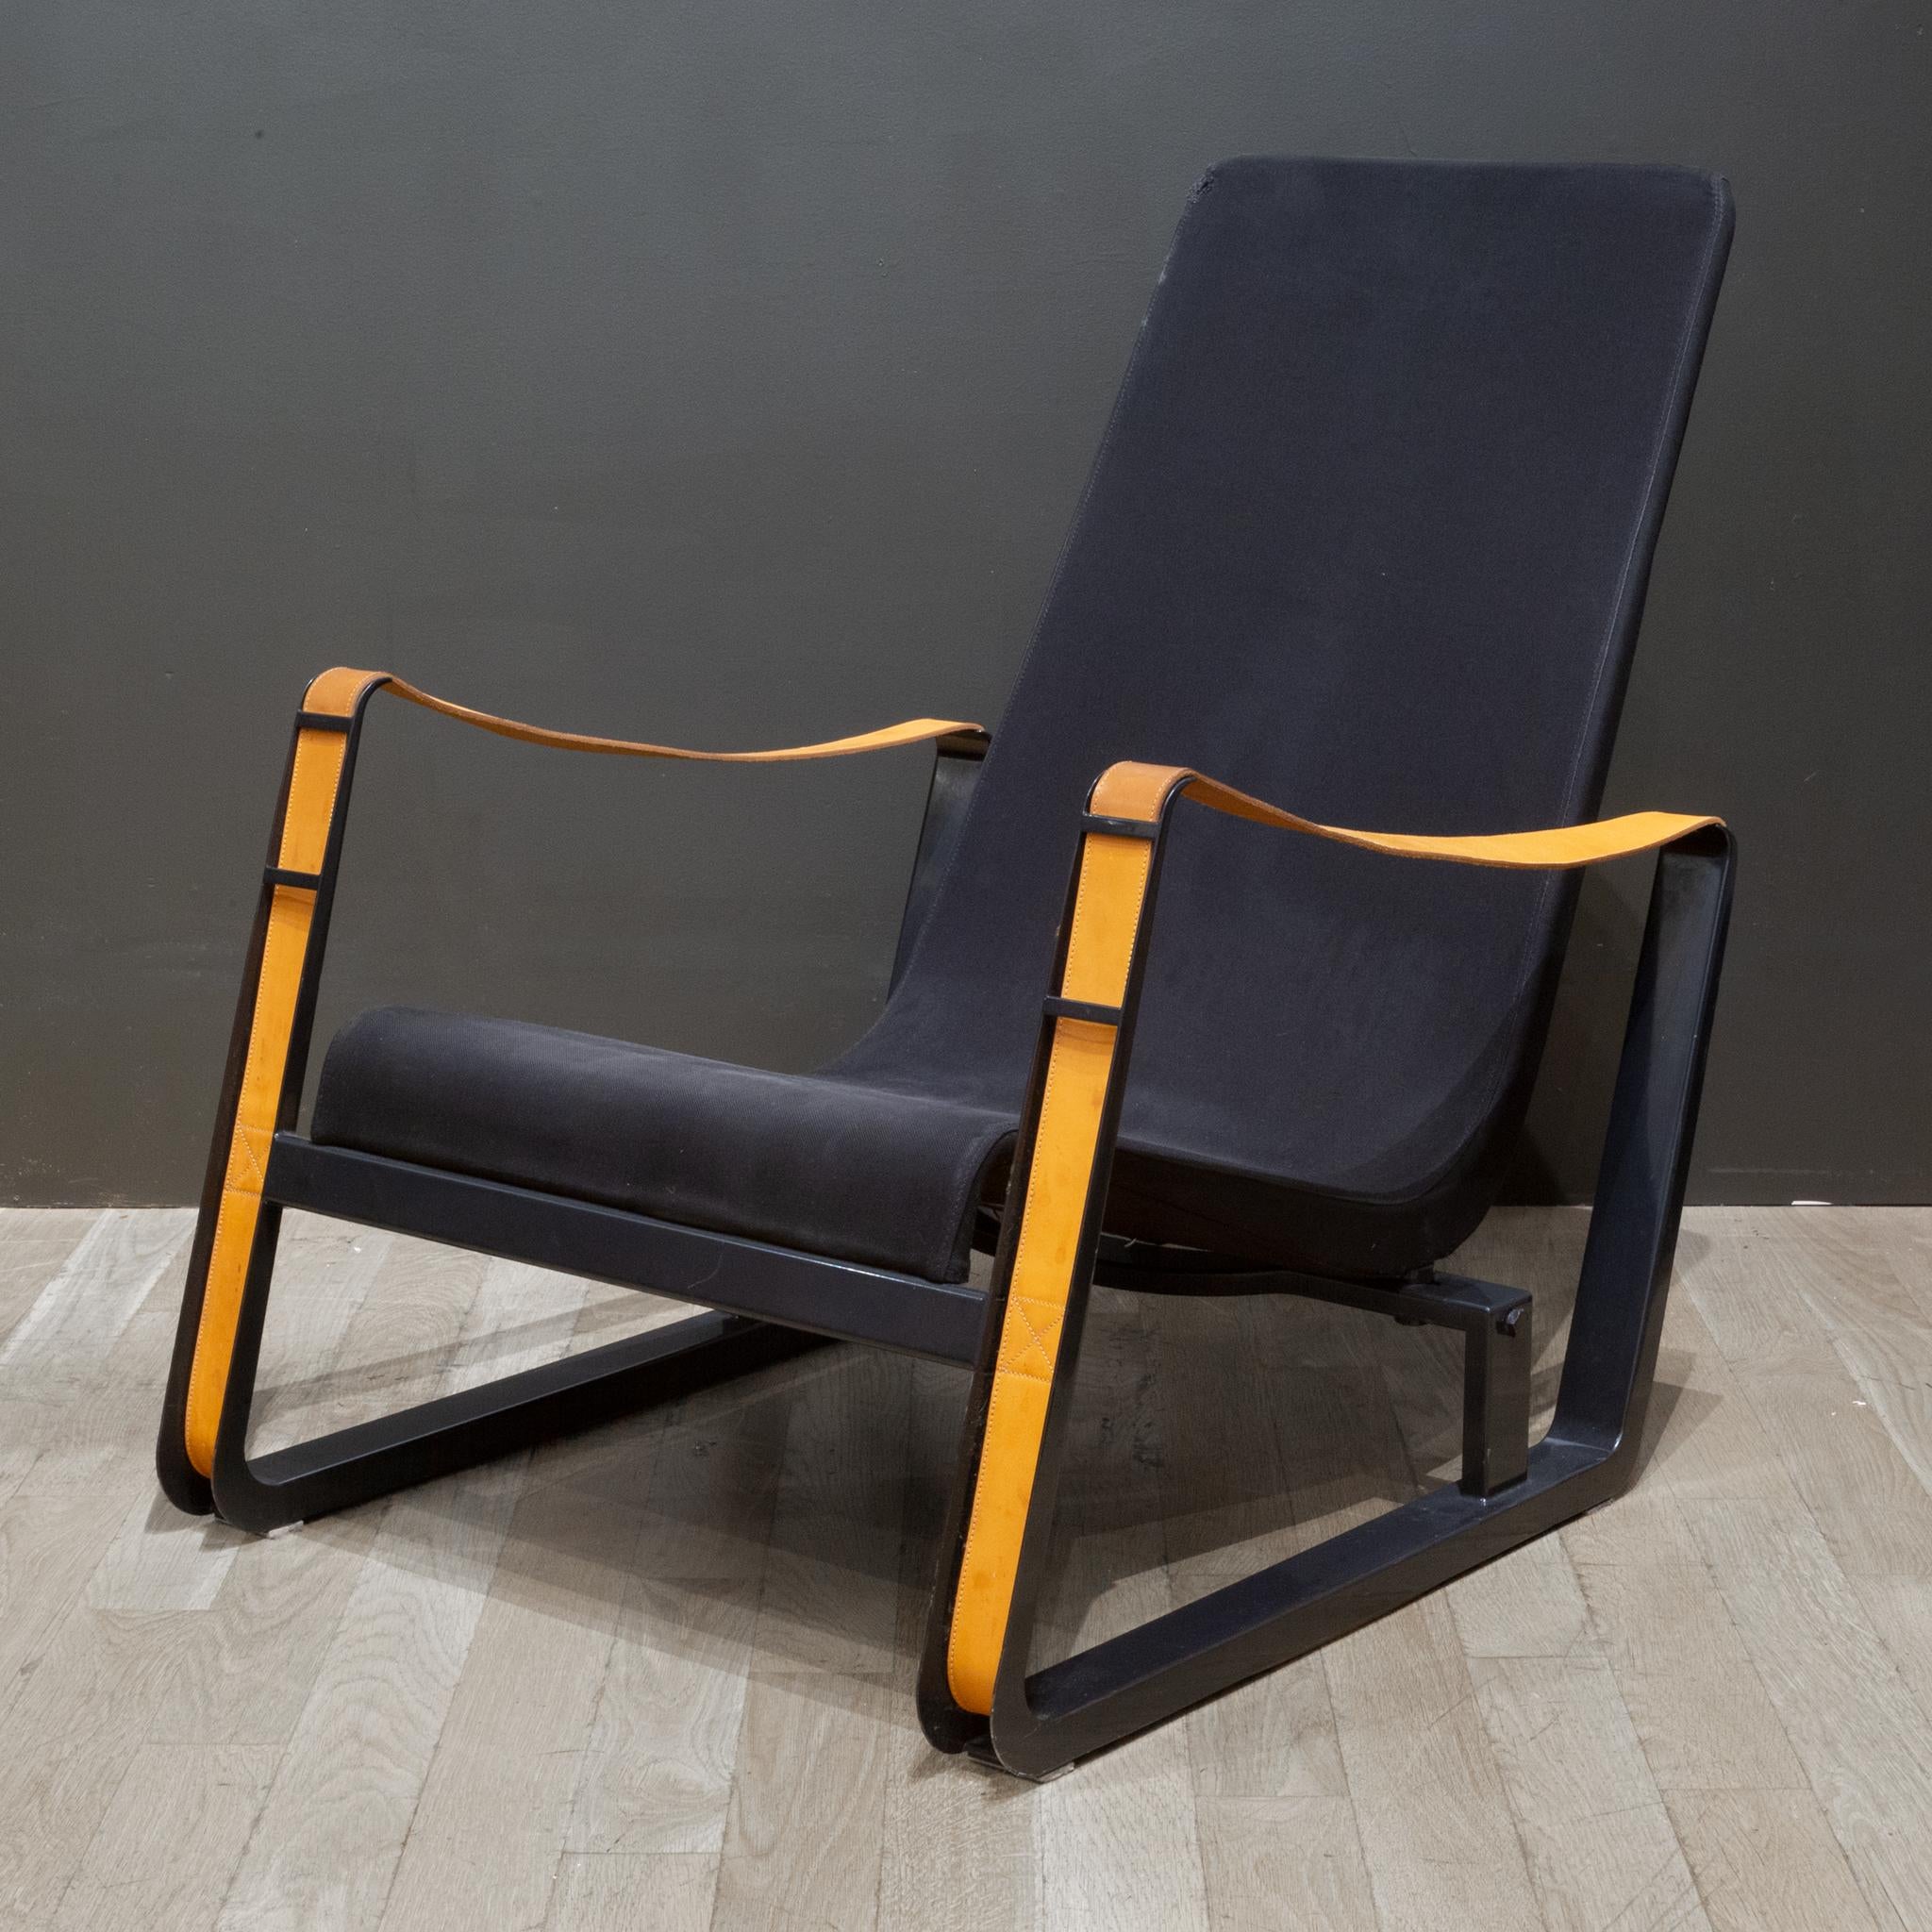 German Jean Prouve Cite Lounge Chairs by Vitra-One available